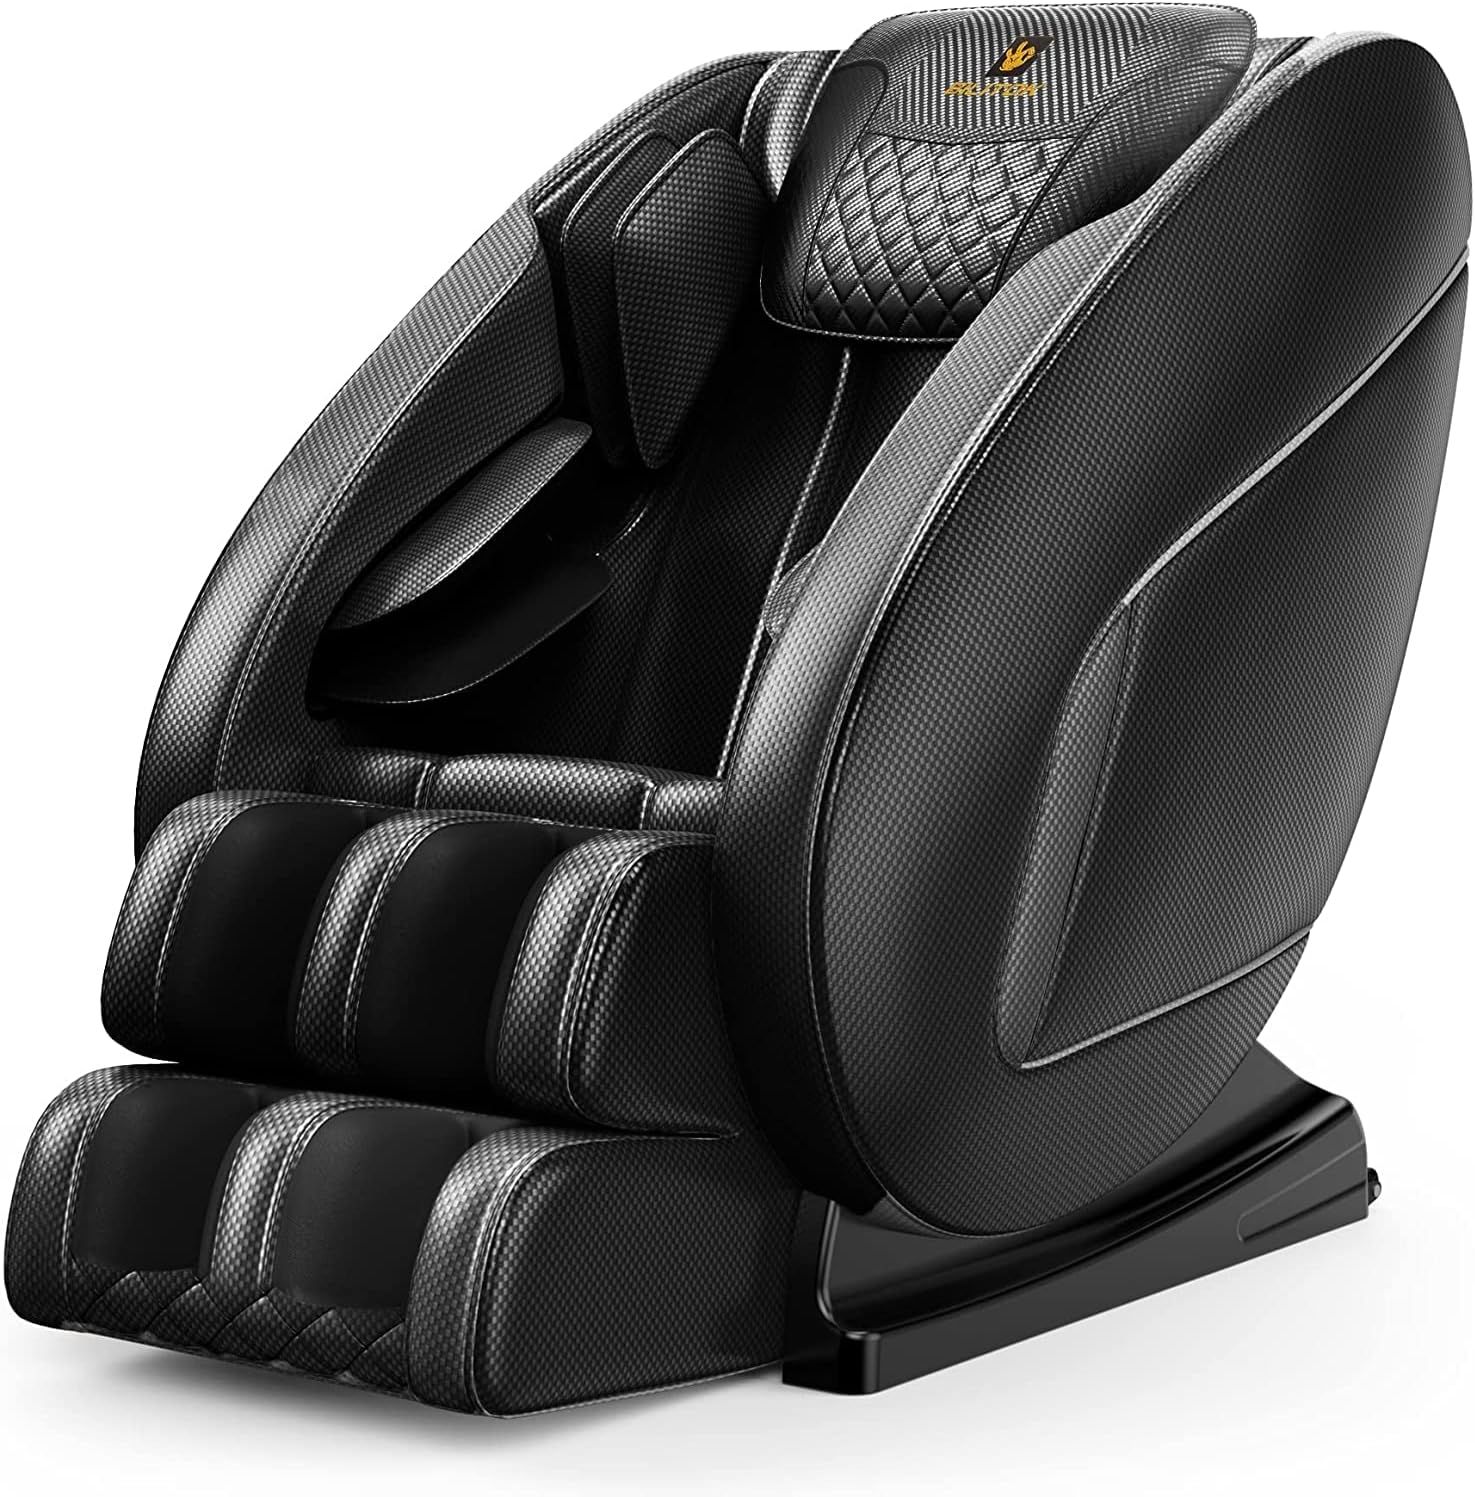 prime day massage chair deal